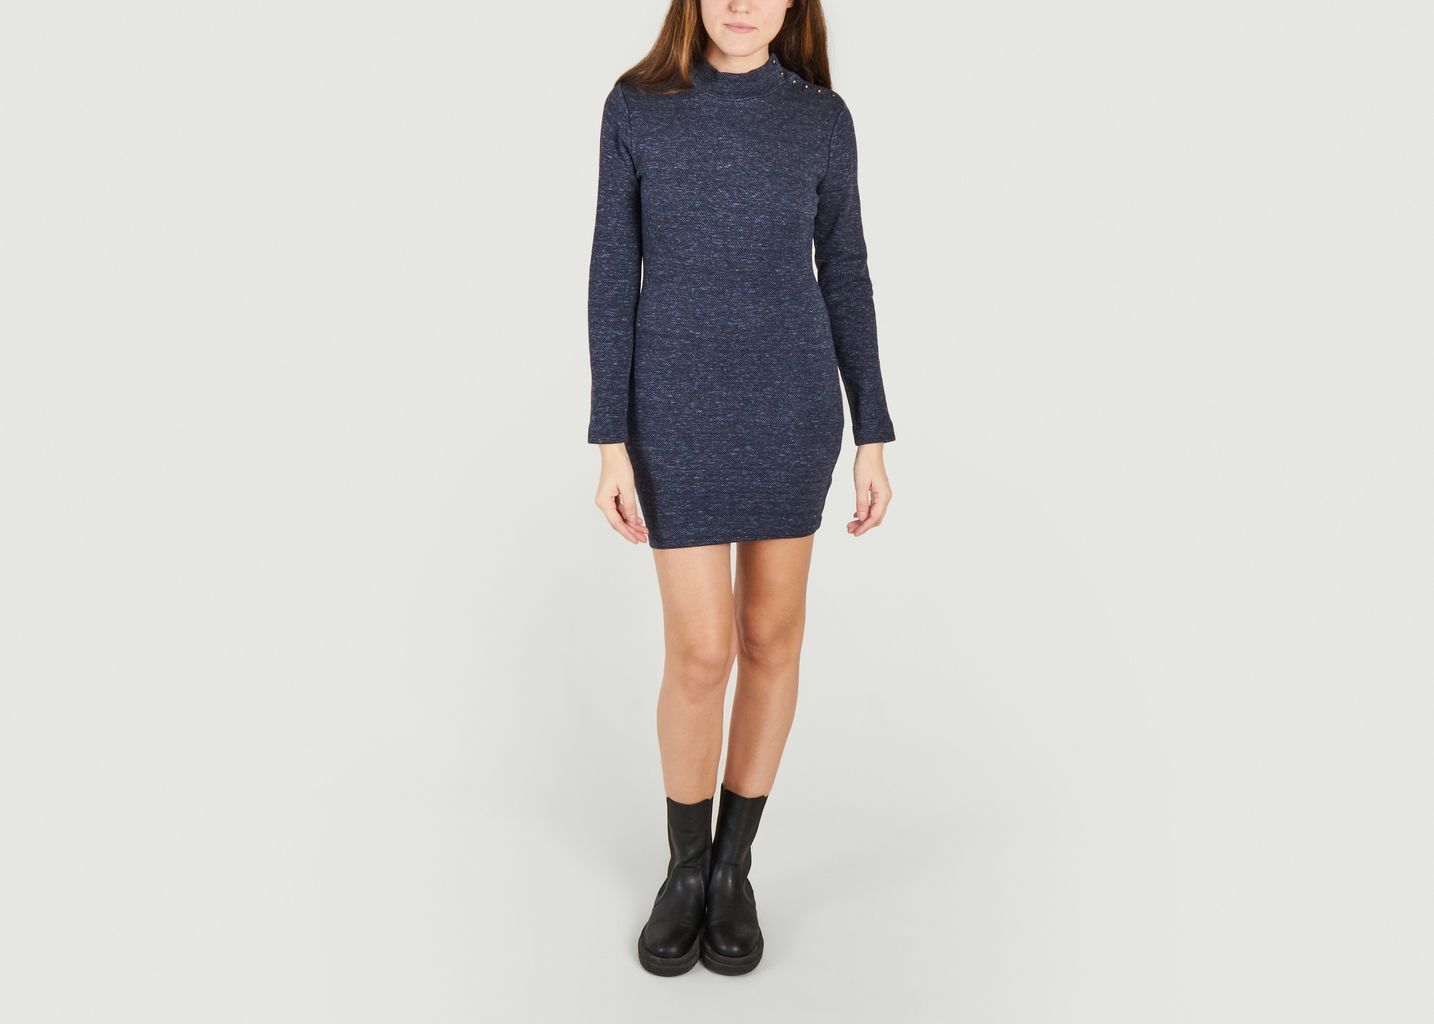 Augusta short dress with long sleeves - Sessun